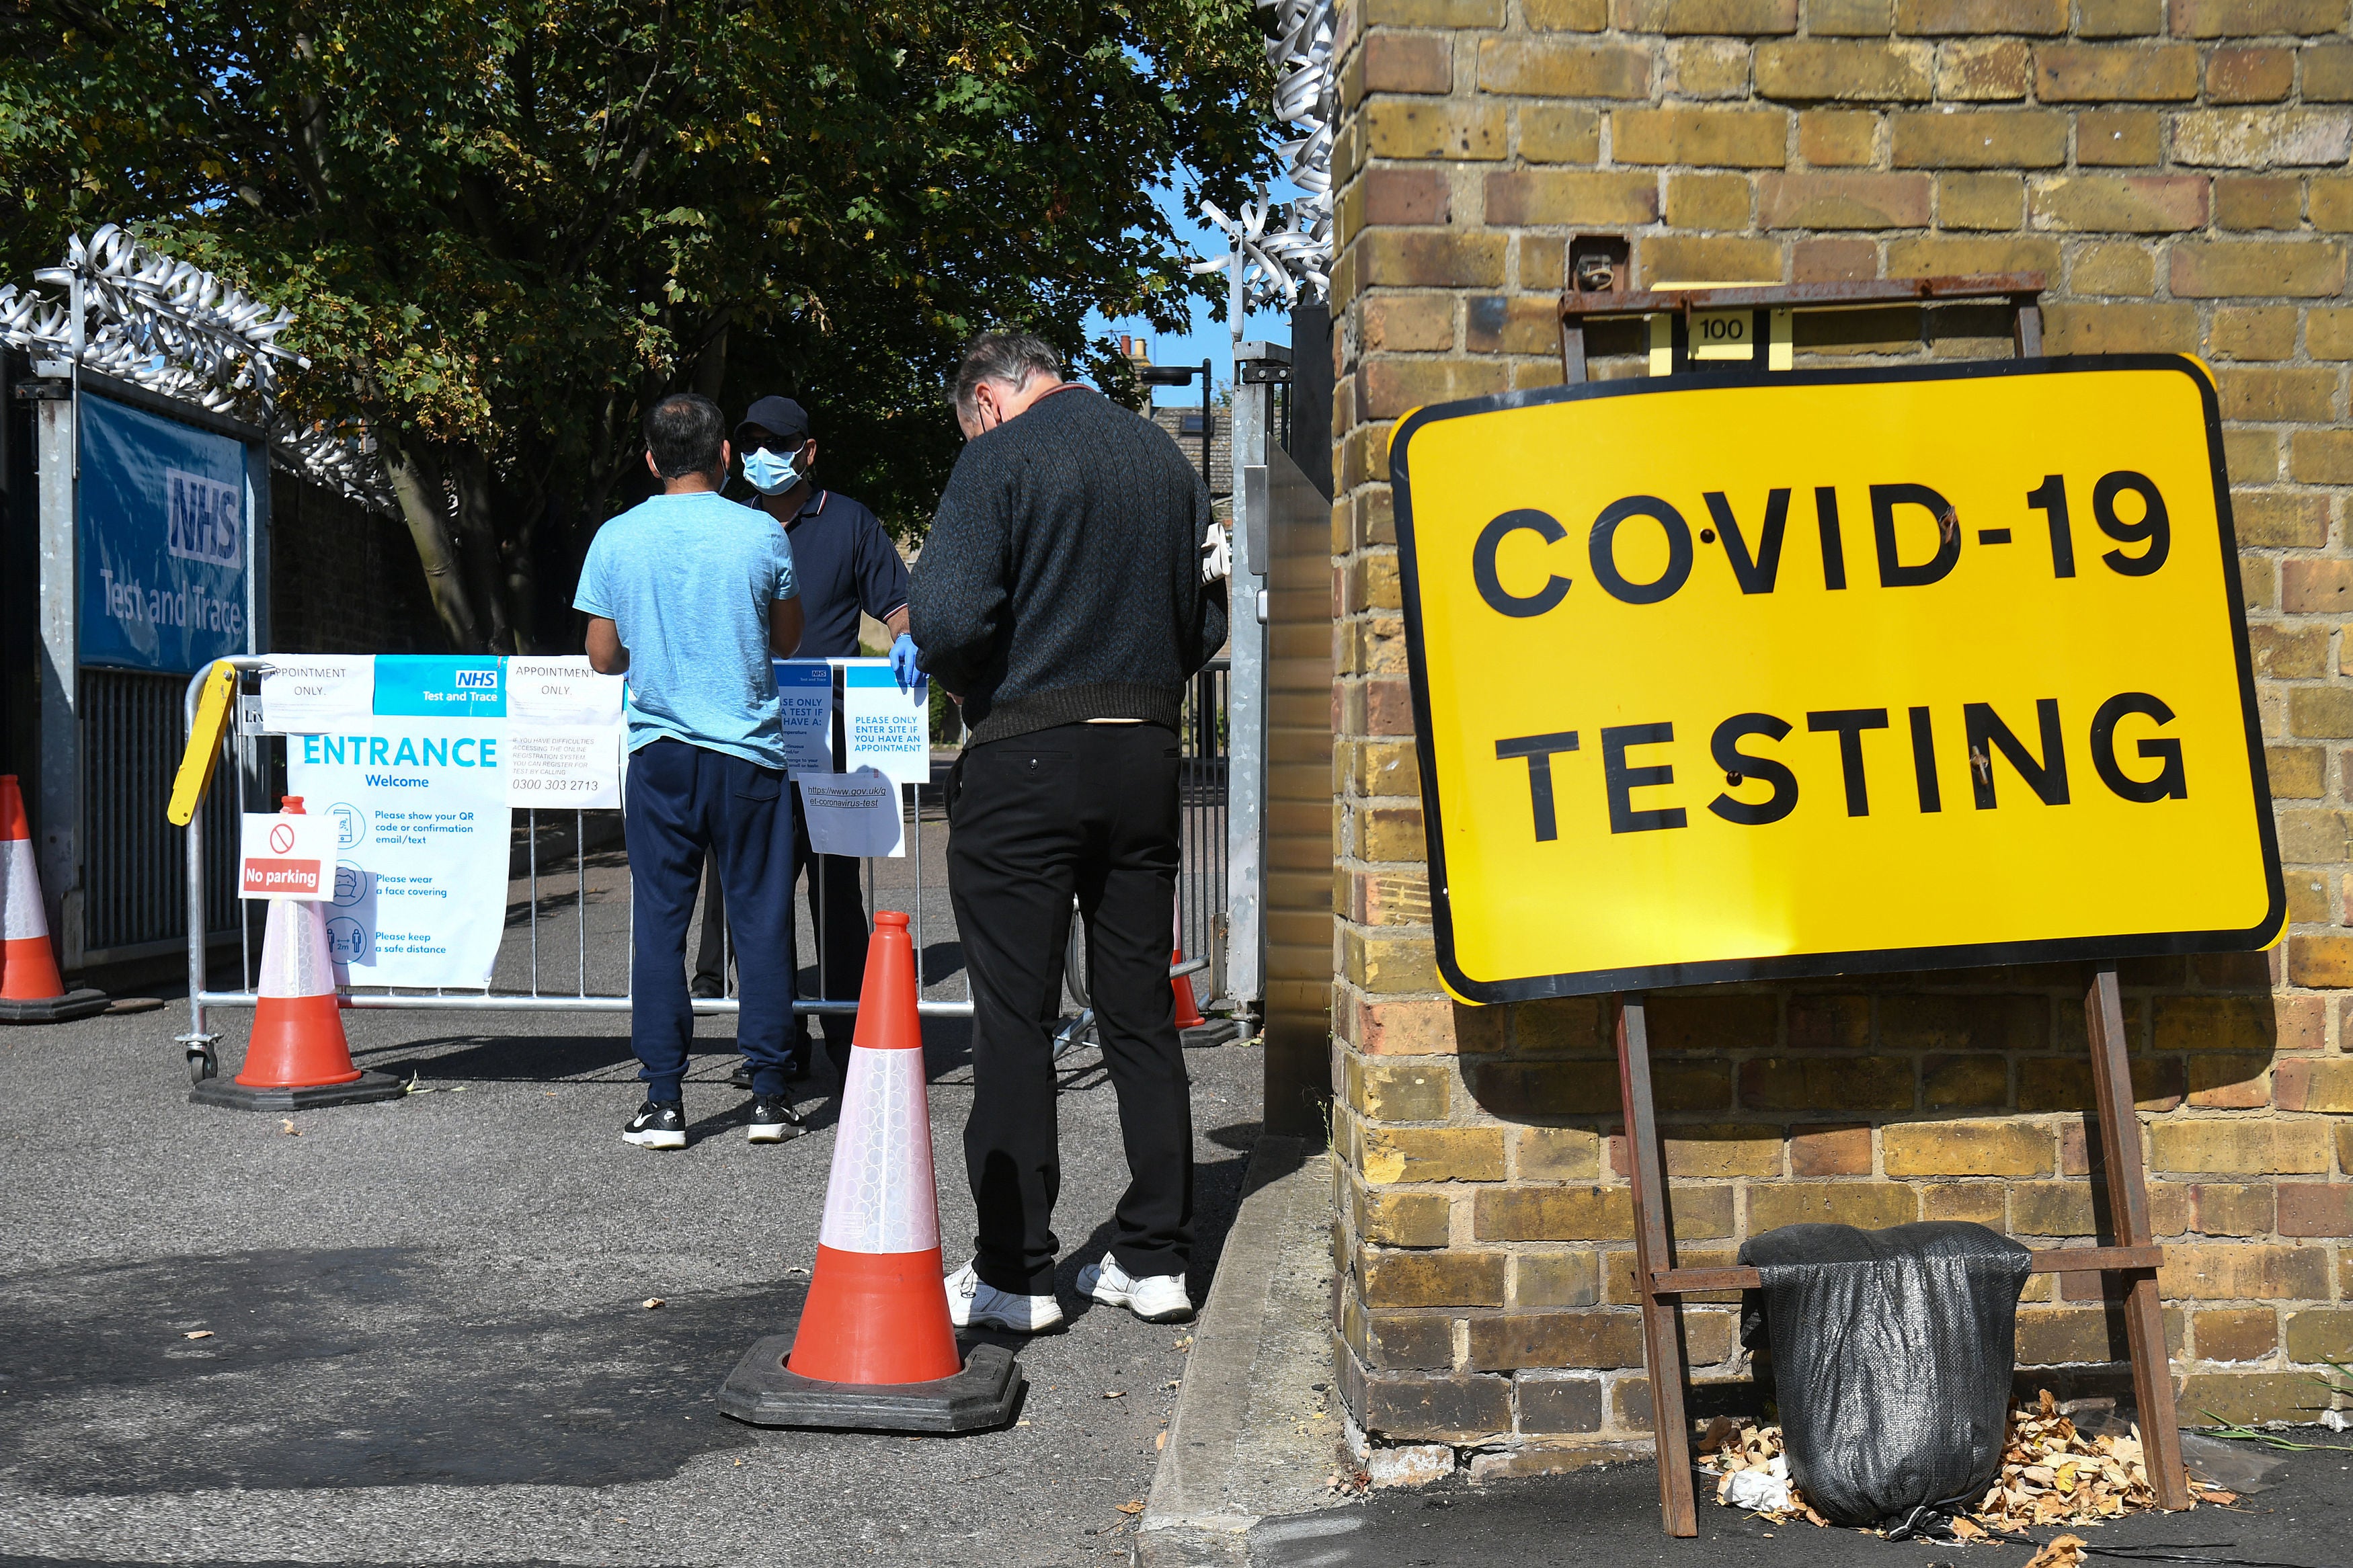 People queue up outside a coronavirus testing centre offering walk-in appointments in east London